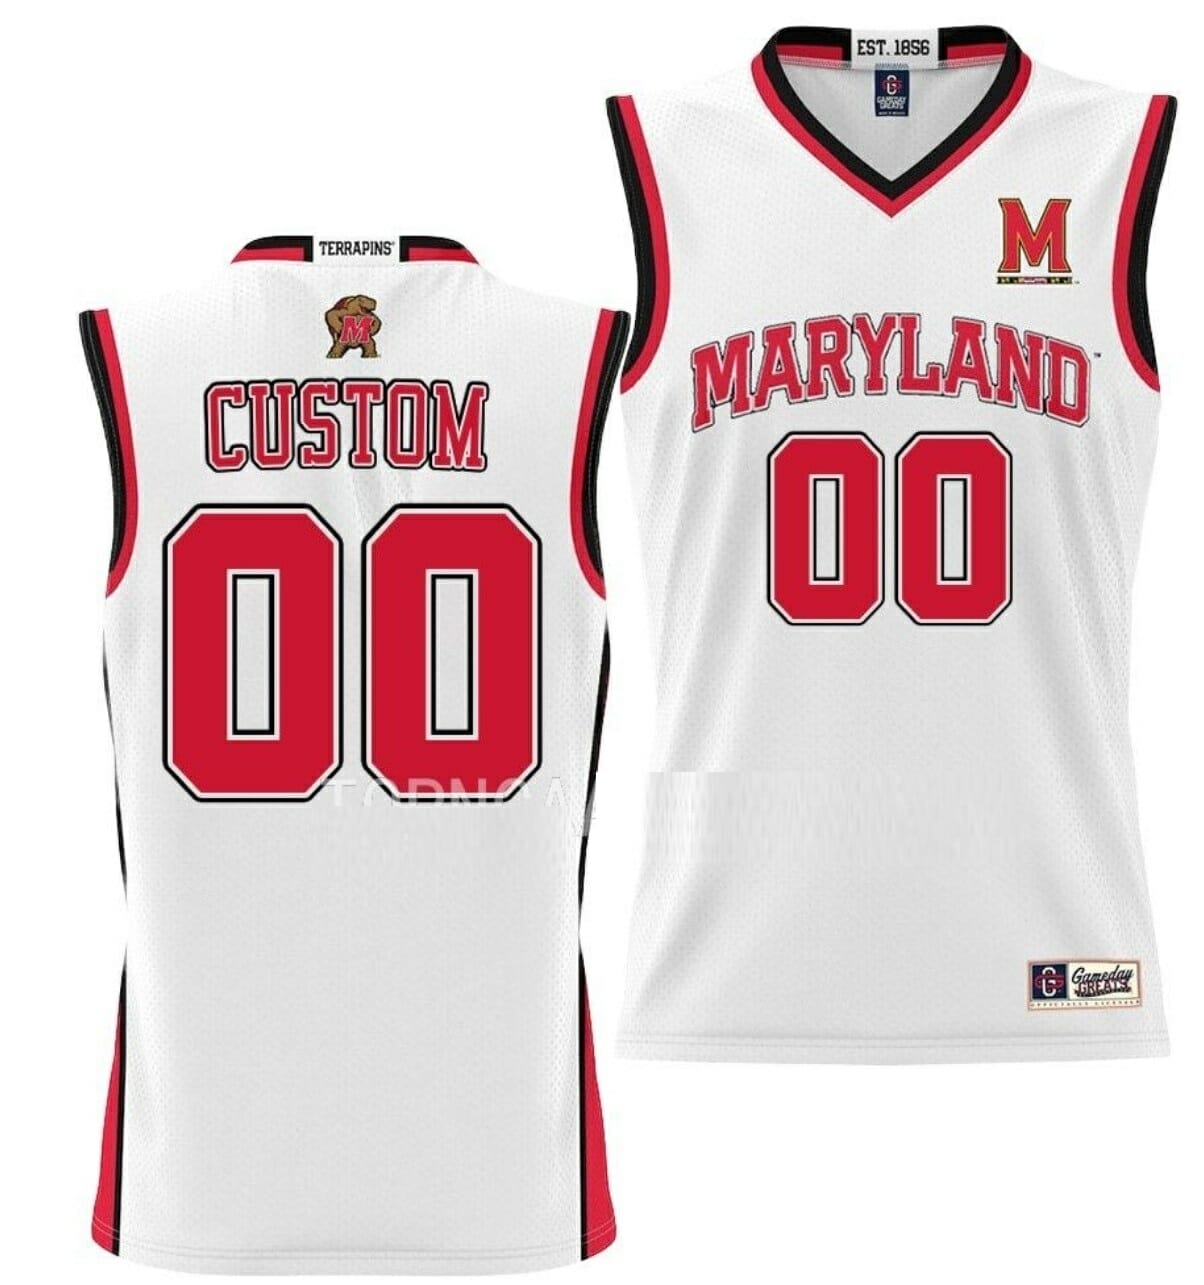 Custom College Basketball Jerseys Maryland Terrapins Jersey Name and Number NIL Pick-A-Player White